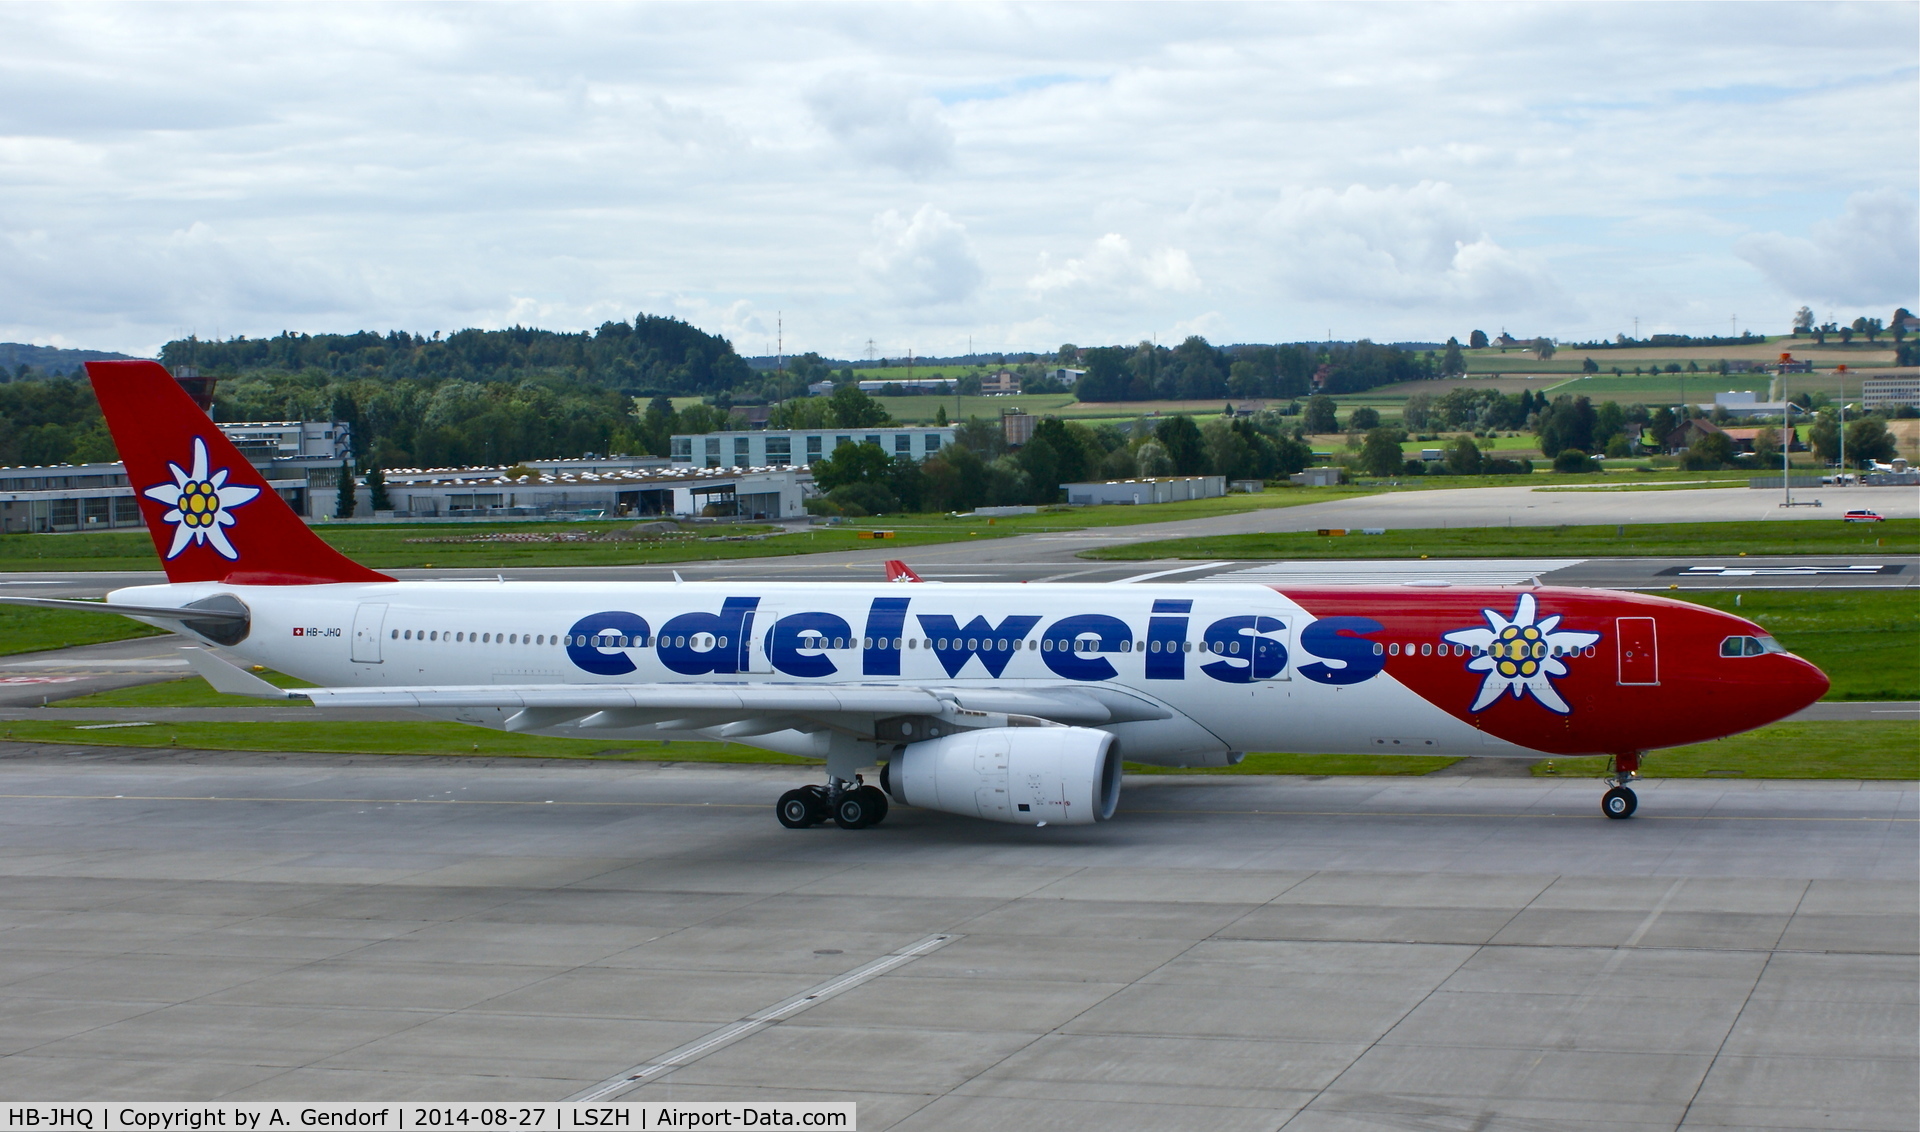 HB-JHQ, 2010 Airbus A330-343X C/N 1193, Edelweiss Air, is here taxiing at Zürich-Kloten(LSZH)